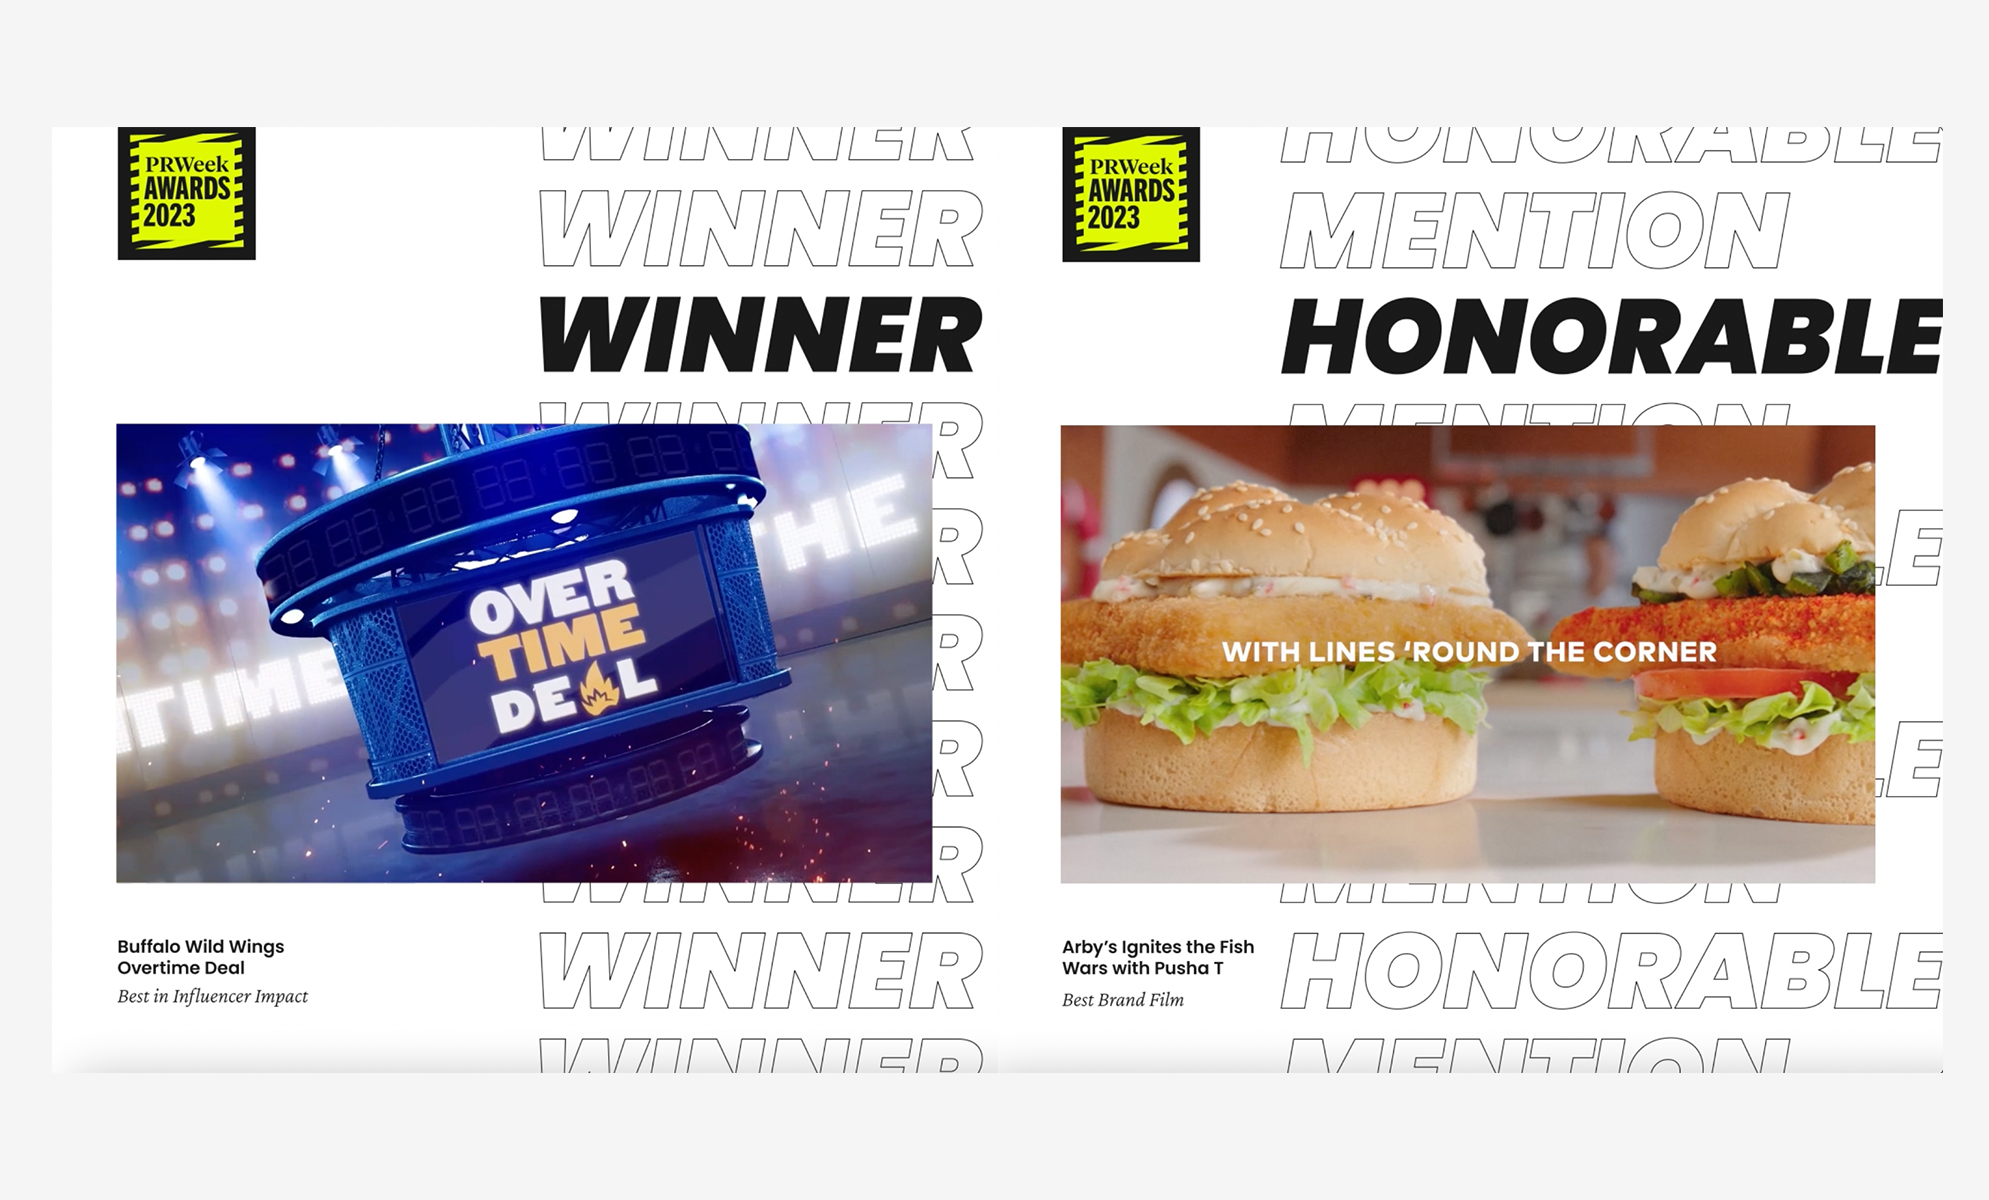 PRWeek Award winner Buffalo Wild Wings Overtime Deal and honorable mention Arby's Fish Diss